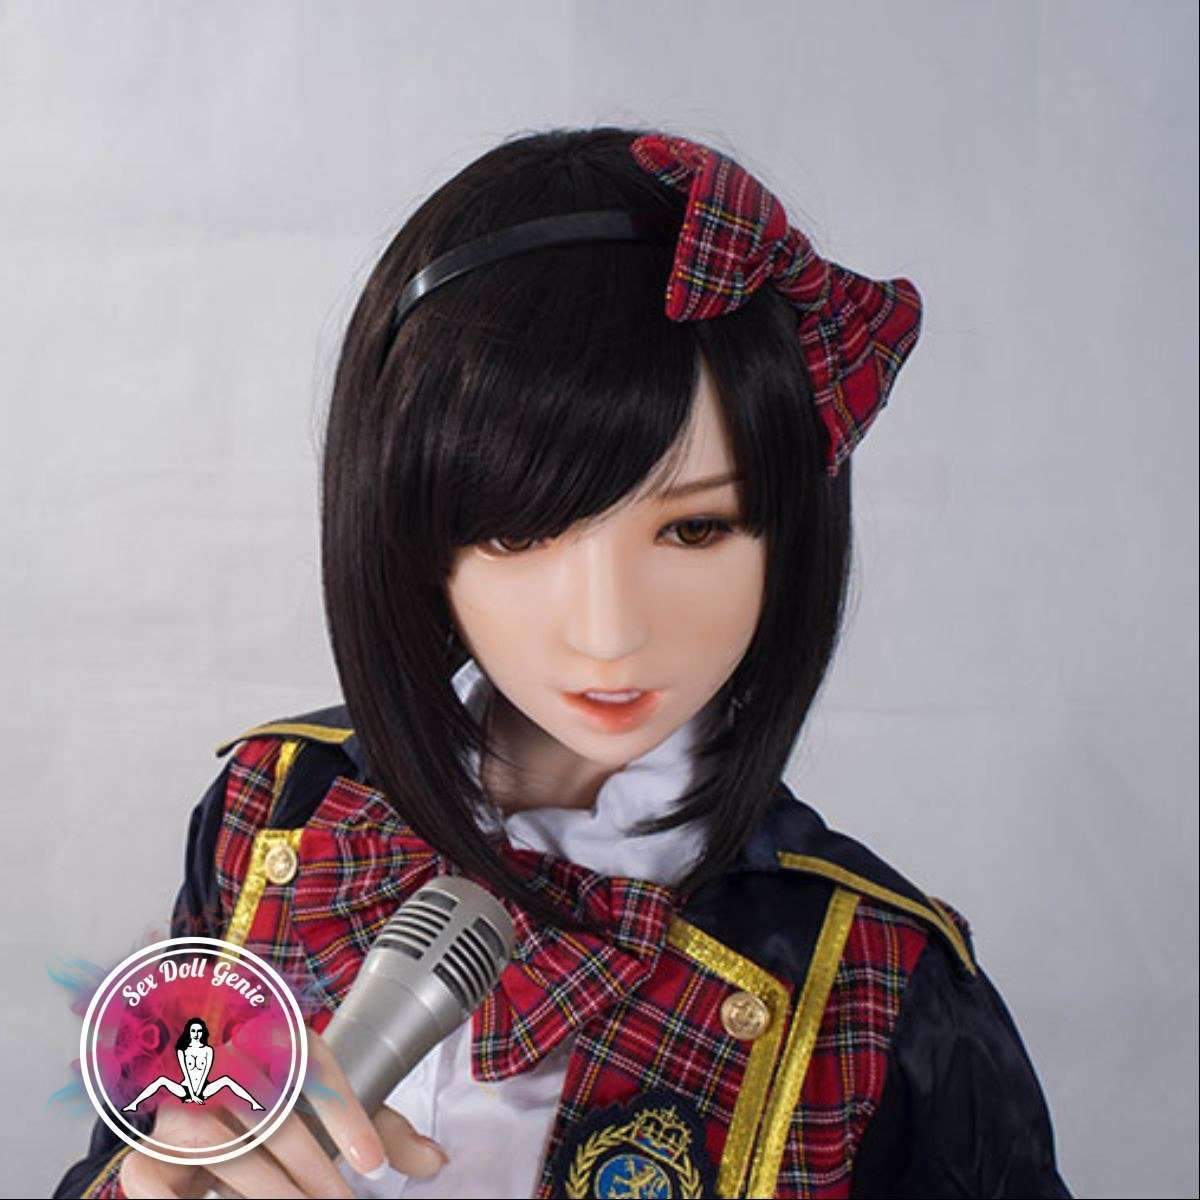 DS Doll - 163Plus - Kathy Head - Type 3 D Cup Silicone Doll-11